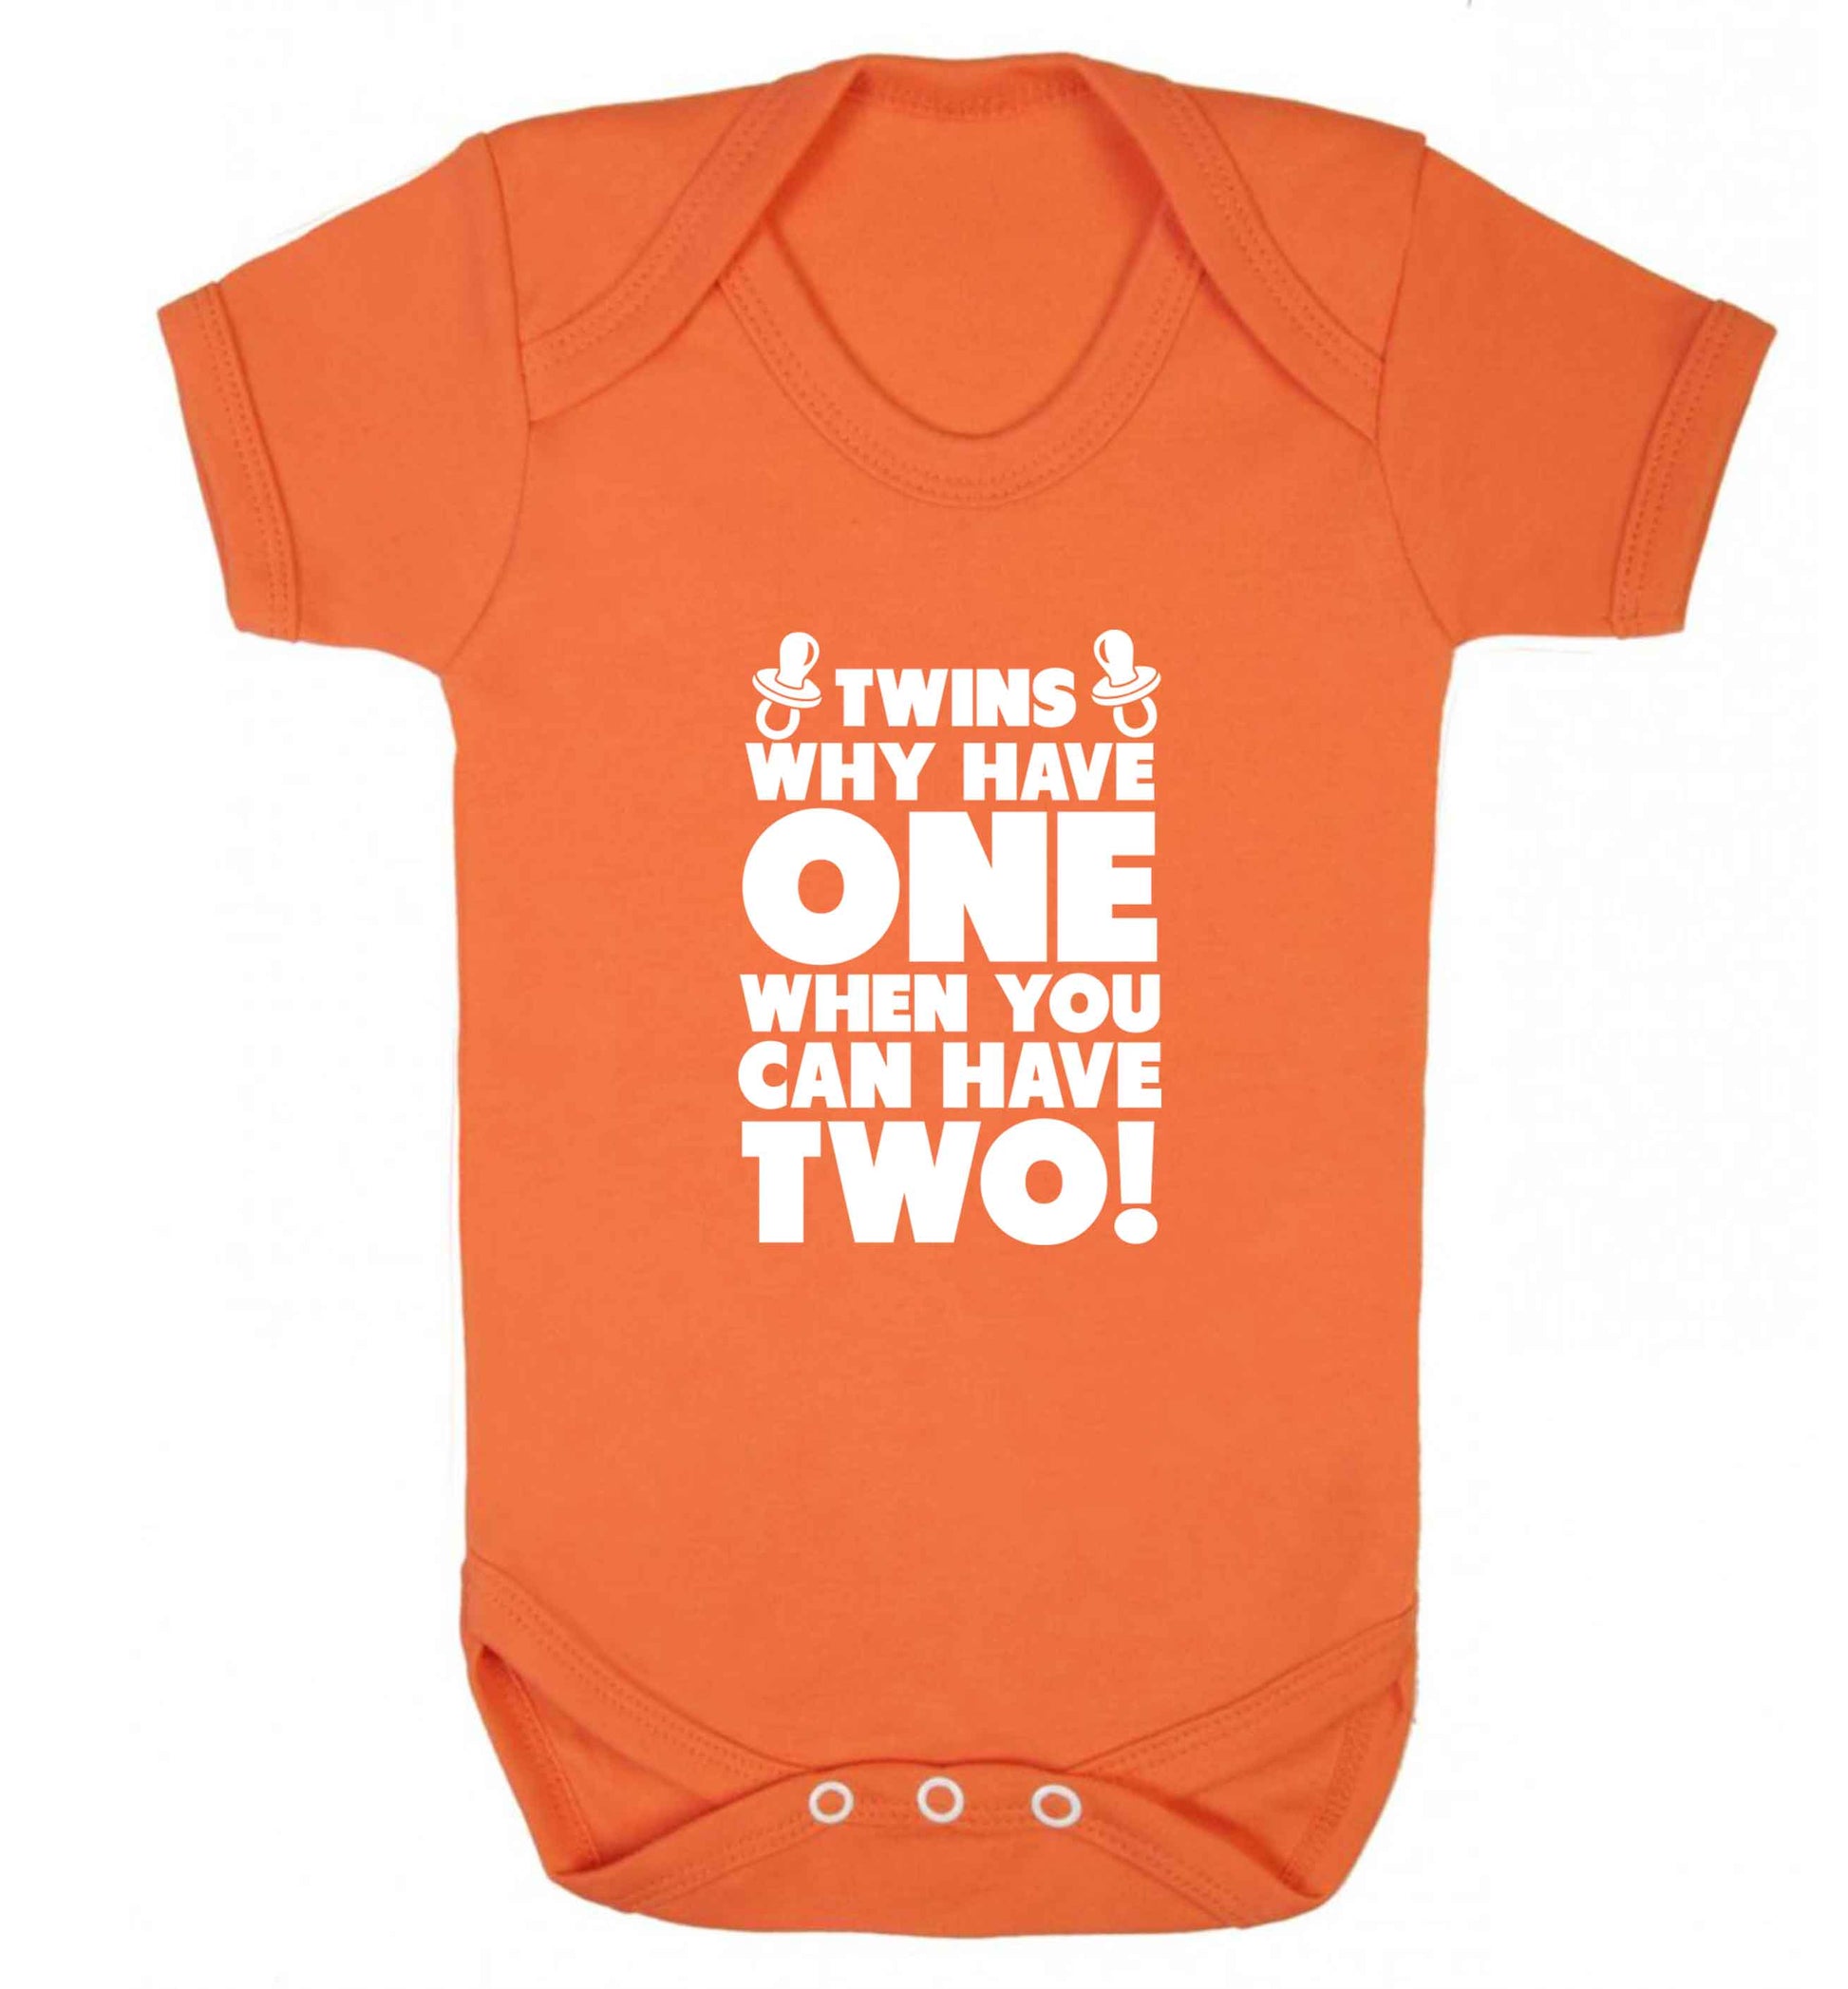 Twins why have one when you can have two baby vest orange 18-24 months